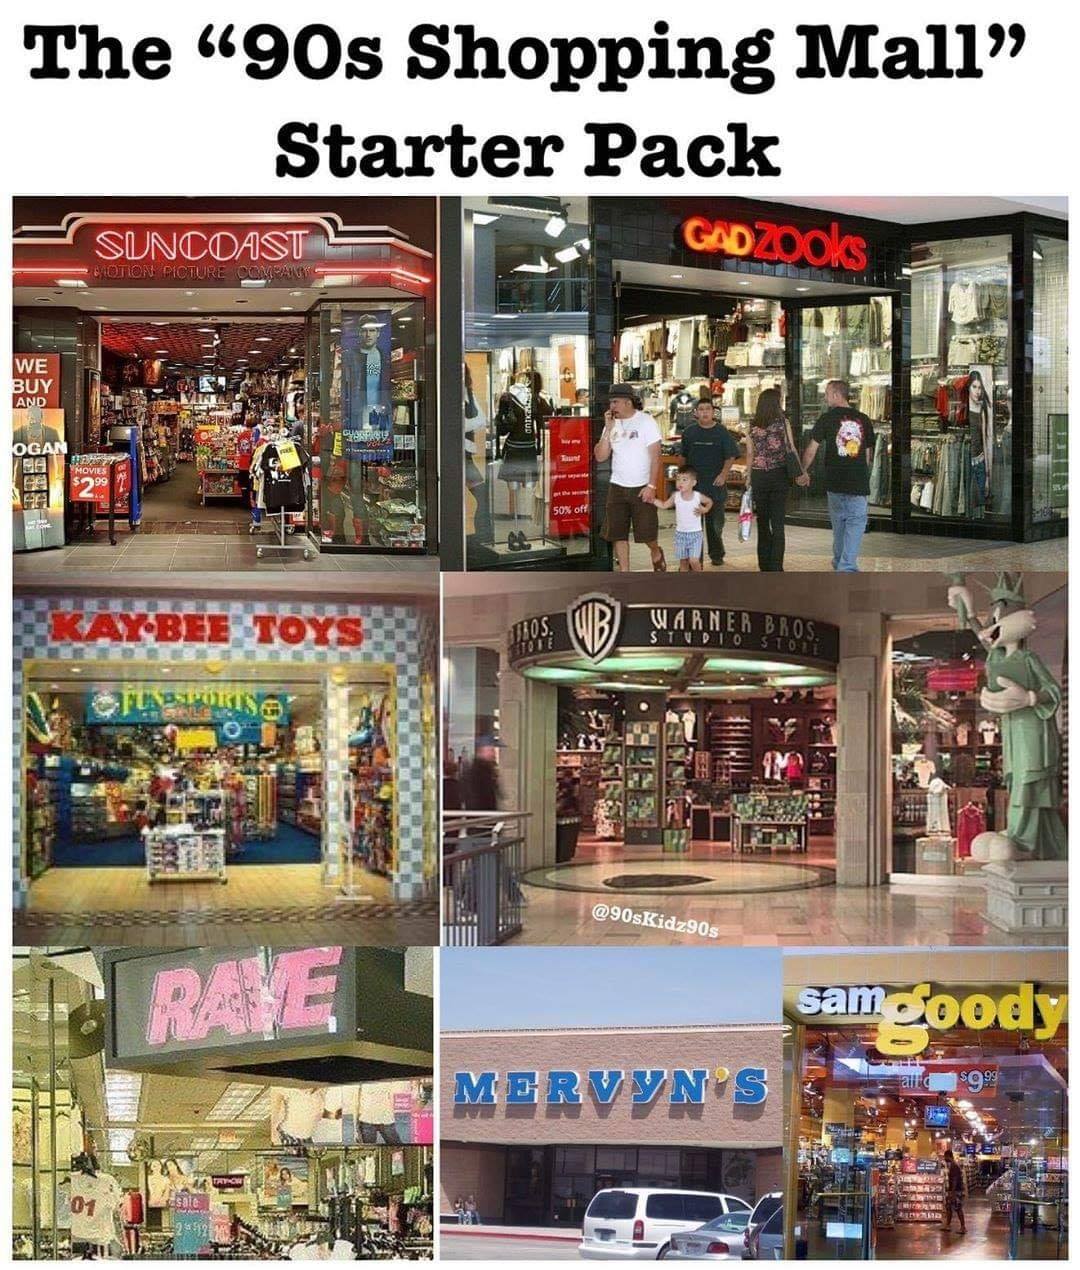 90s mall starter pack - The 90s Shopping Mall" Starter Pack Suncoast GADZOoks Motion Picture Company We Buy And Ogan Pa Movies 50% off Bee Toys Mos. Stone Wb Warner Bros. Studio Stol Oplas Ports 90s Re samooody alito Mervyn S $9.99 Pe Re